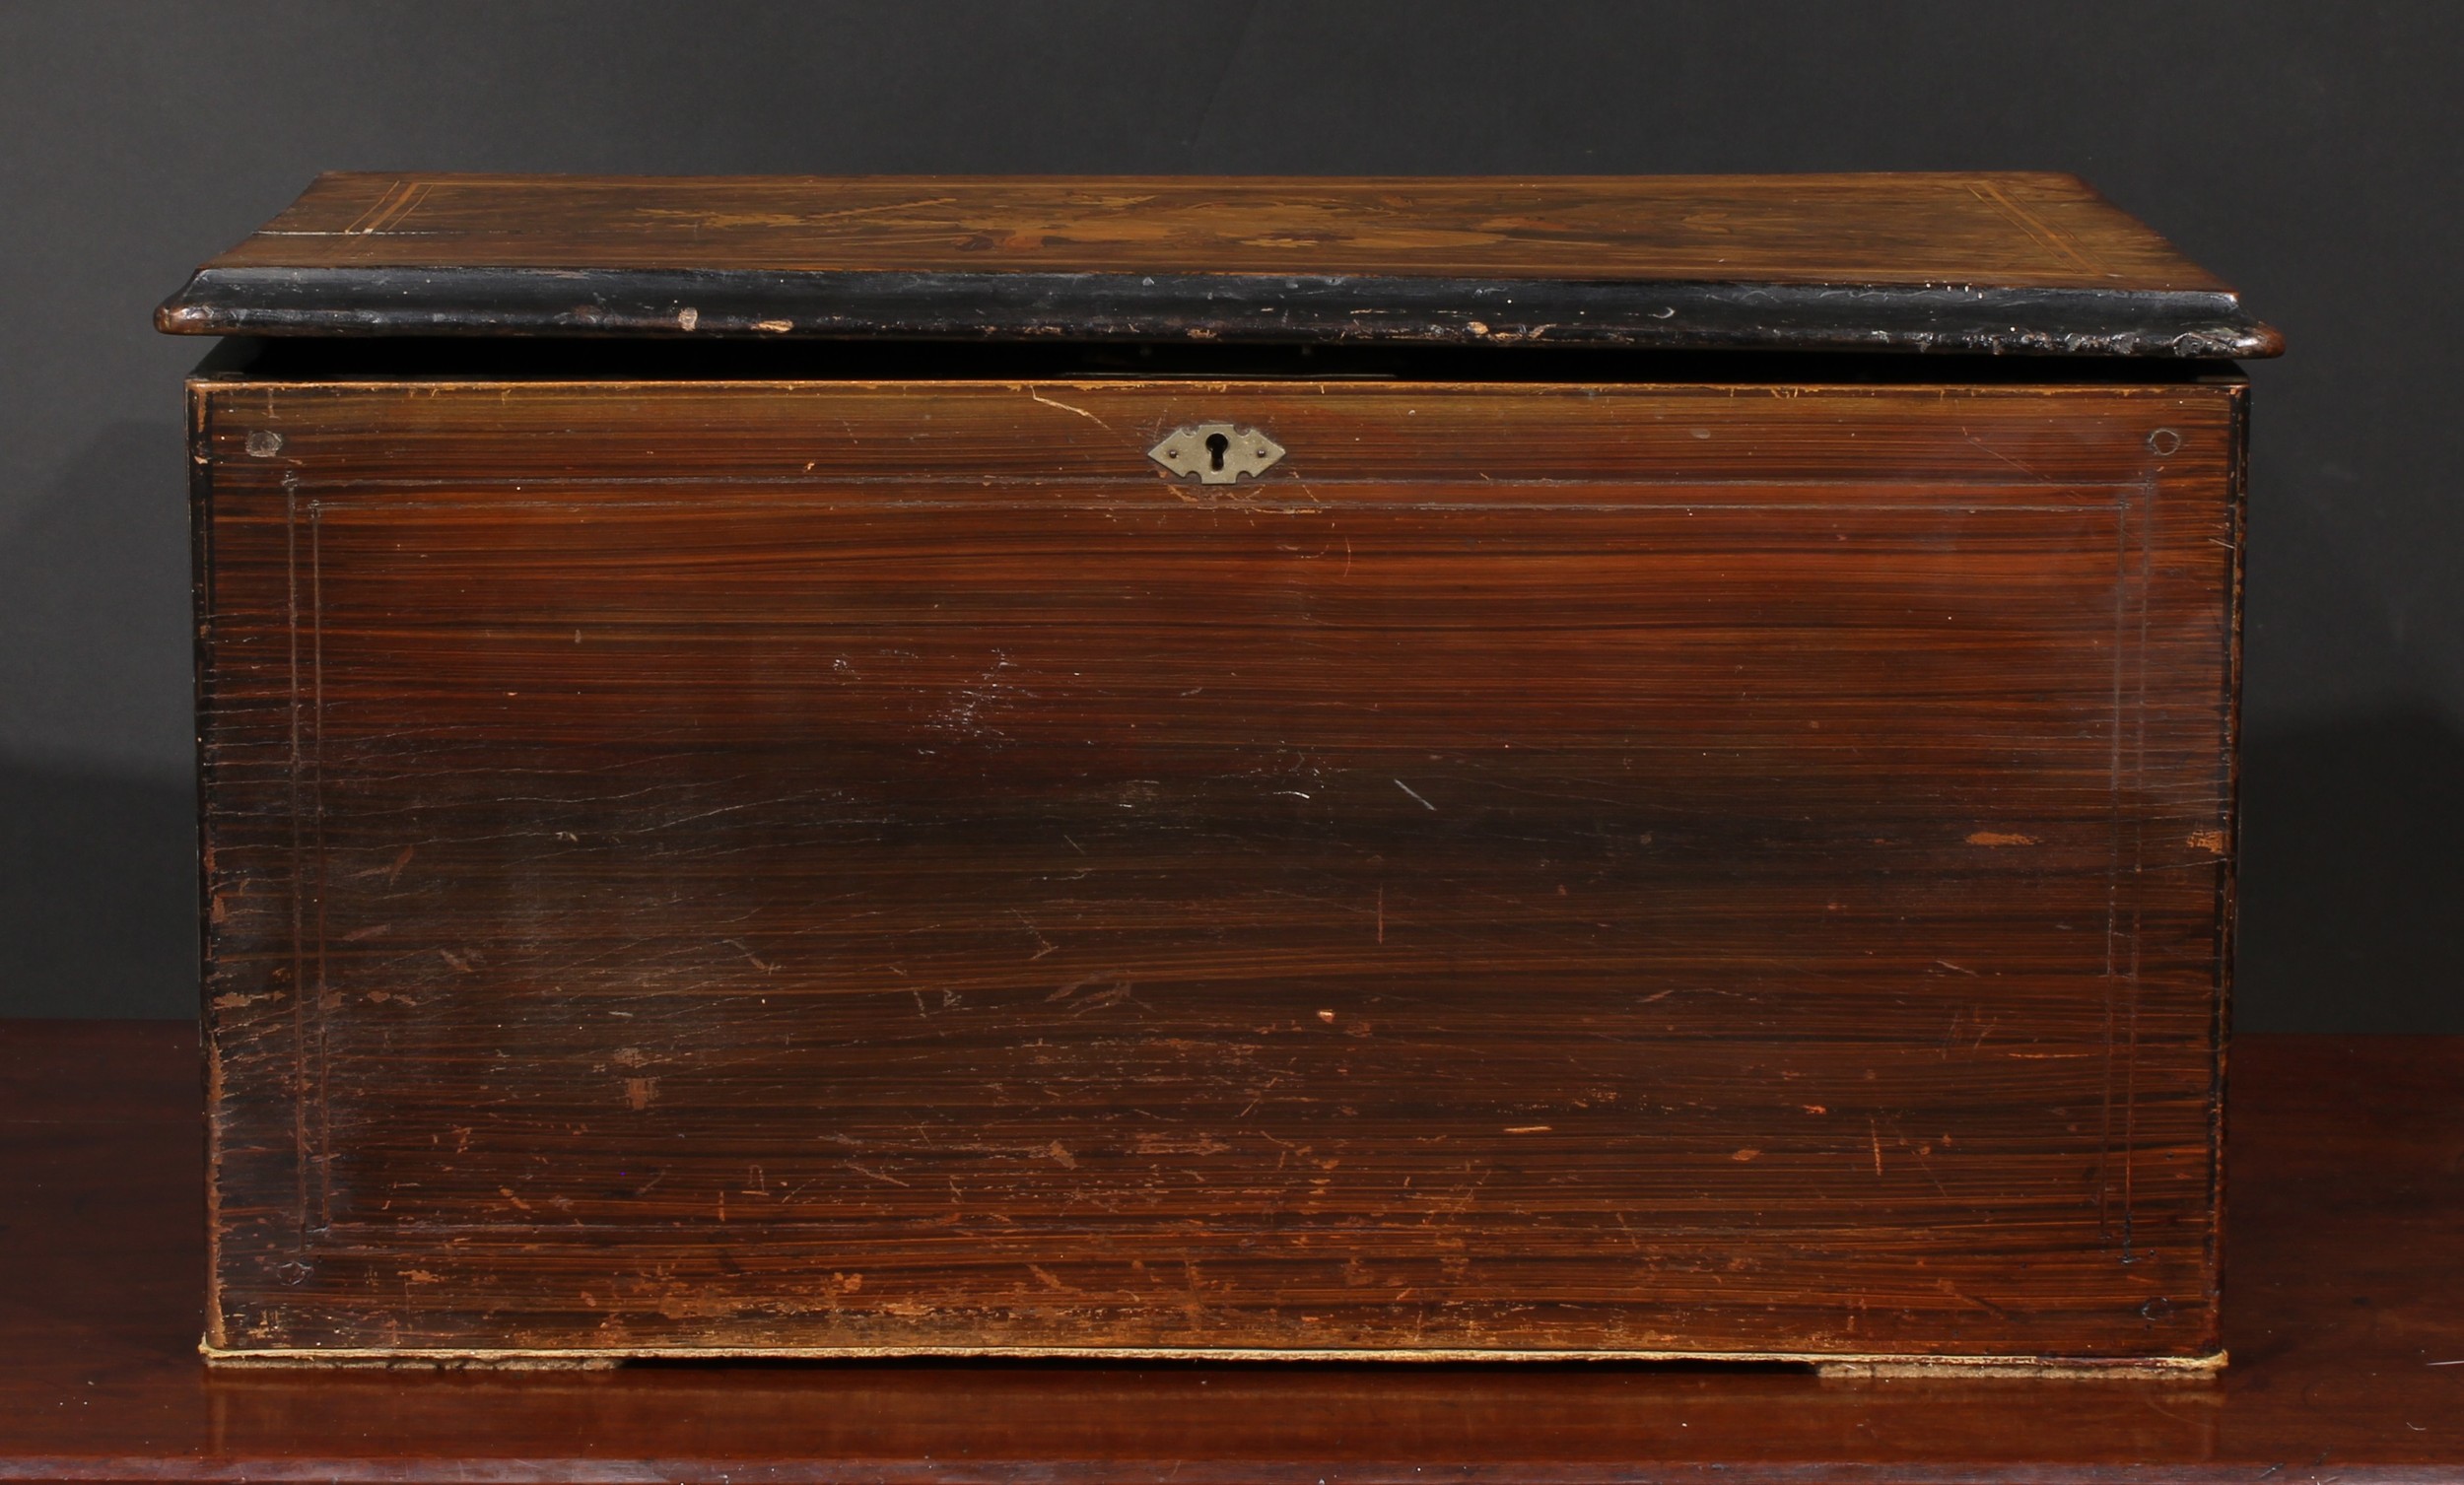 A large 19th century Swiss rosewood and marquetry rectangular bells-in-sight music box, the 23cm